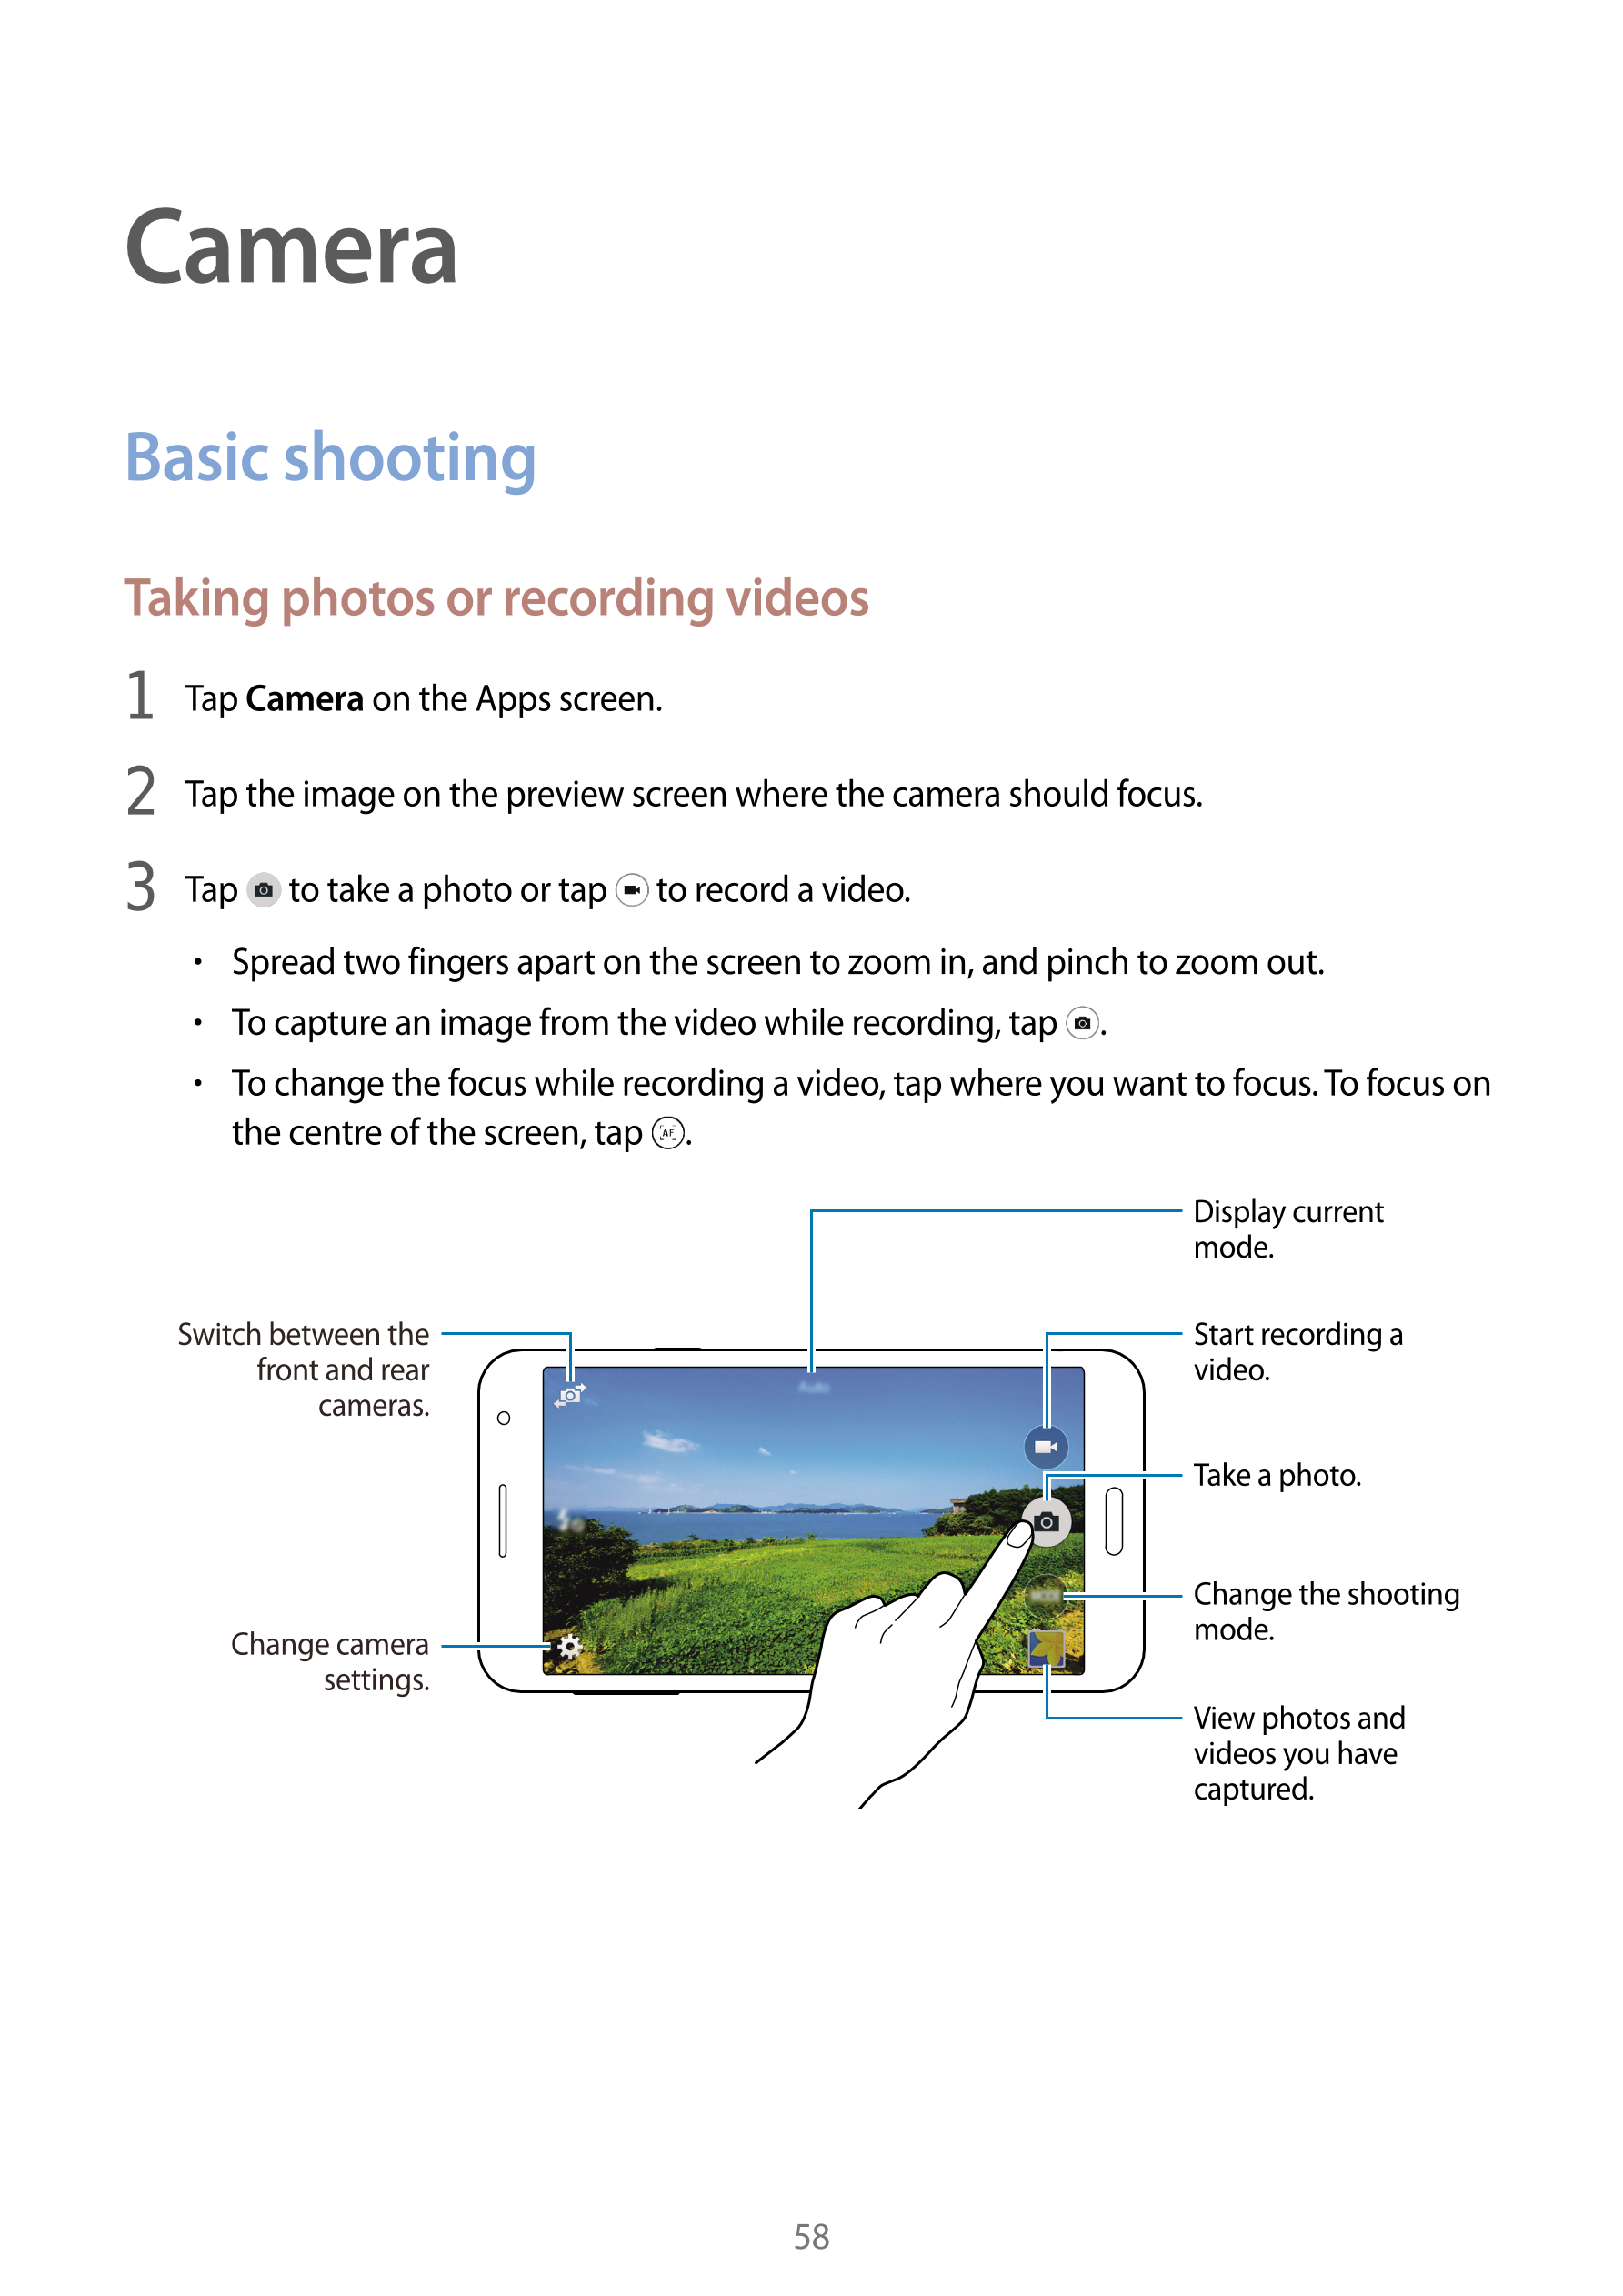 Camera
Basic shooting
Taking photos or recording videos
1  Tap  Camera on the Apps screen.
2  Tap the image on the preview scree